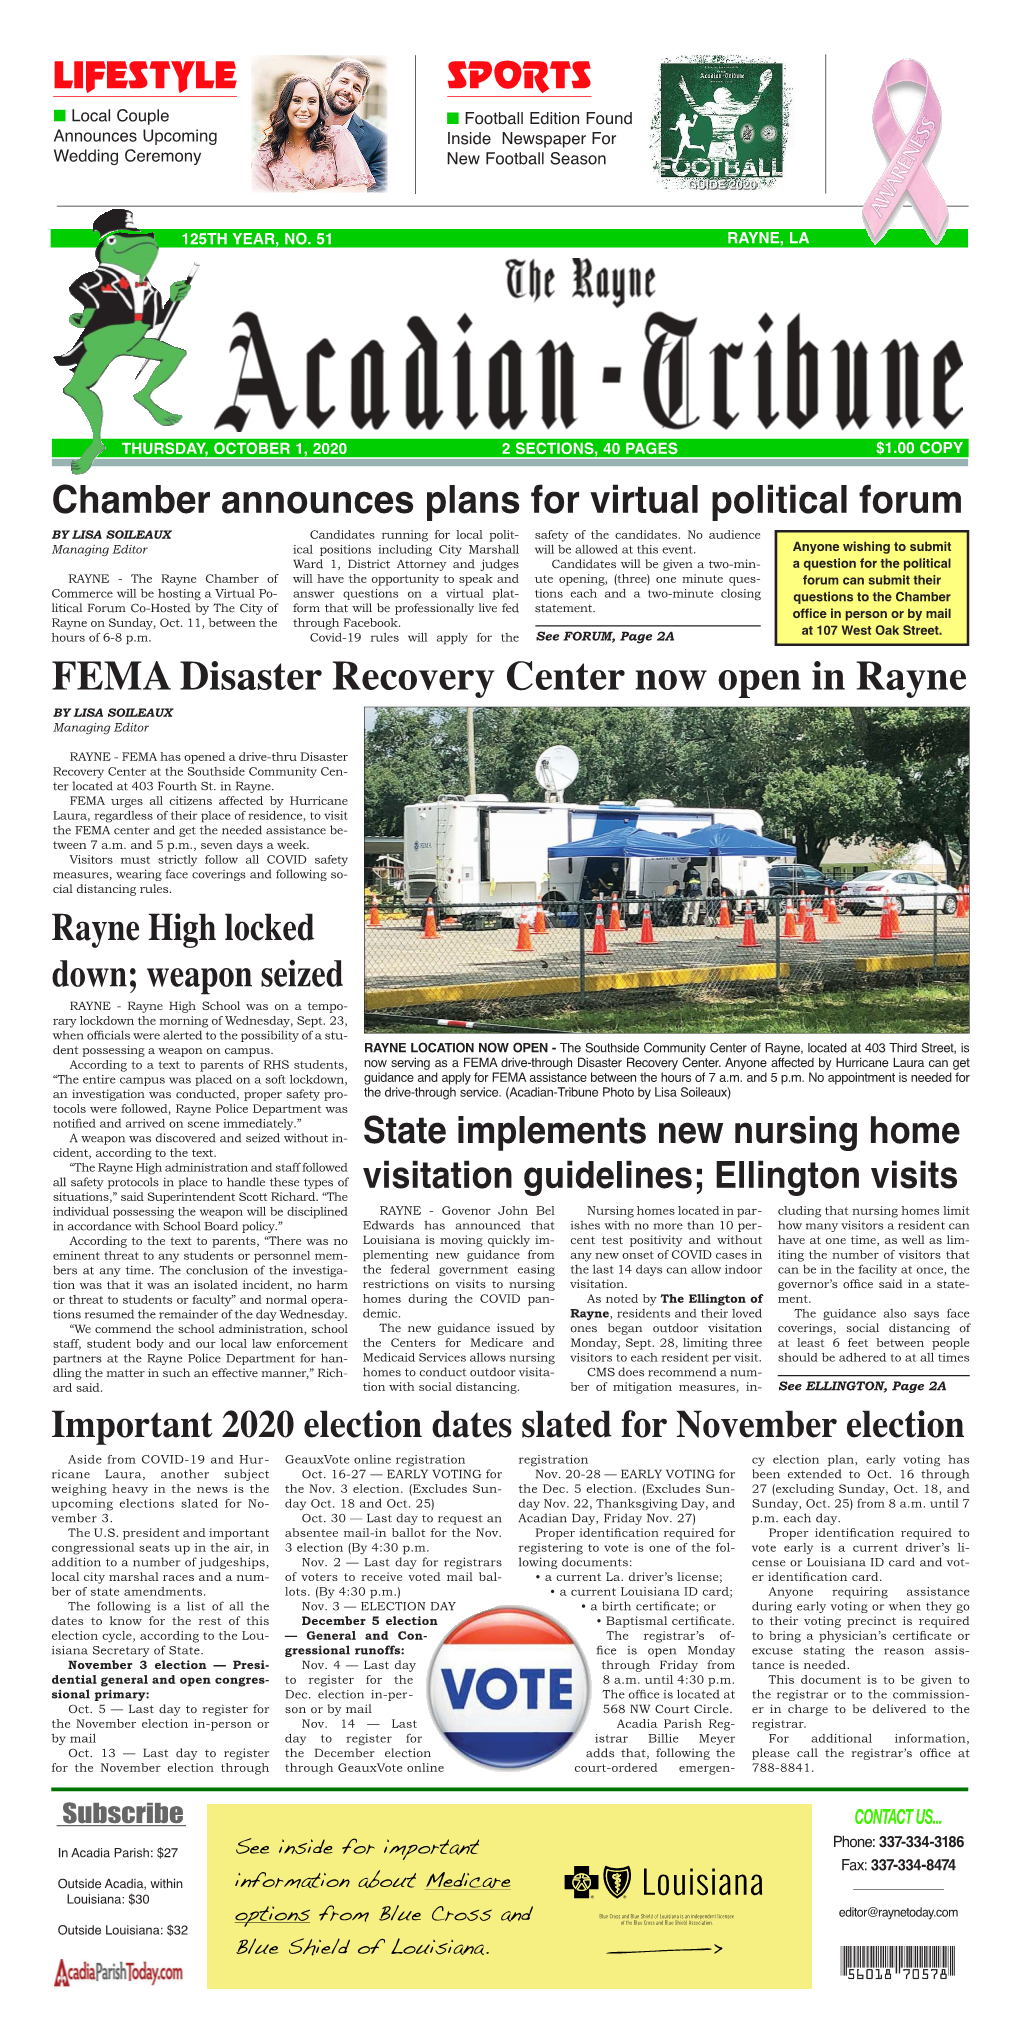 FEMA Disaster Recovery Center Now Open in Rayne by LISA SOILEAUX Managing Editor